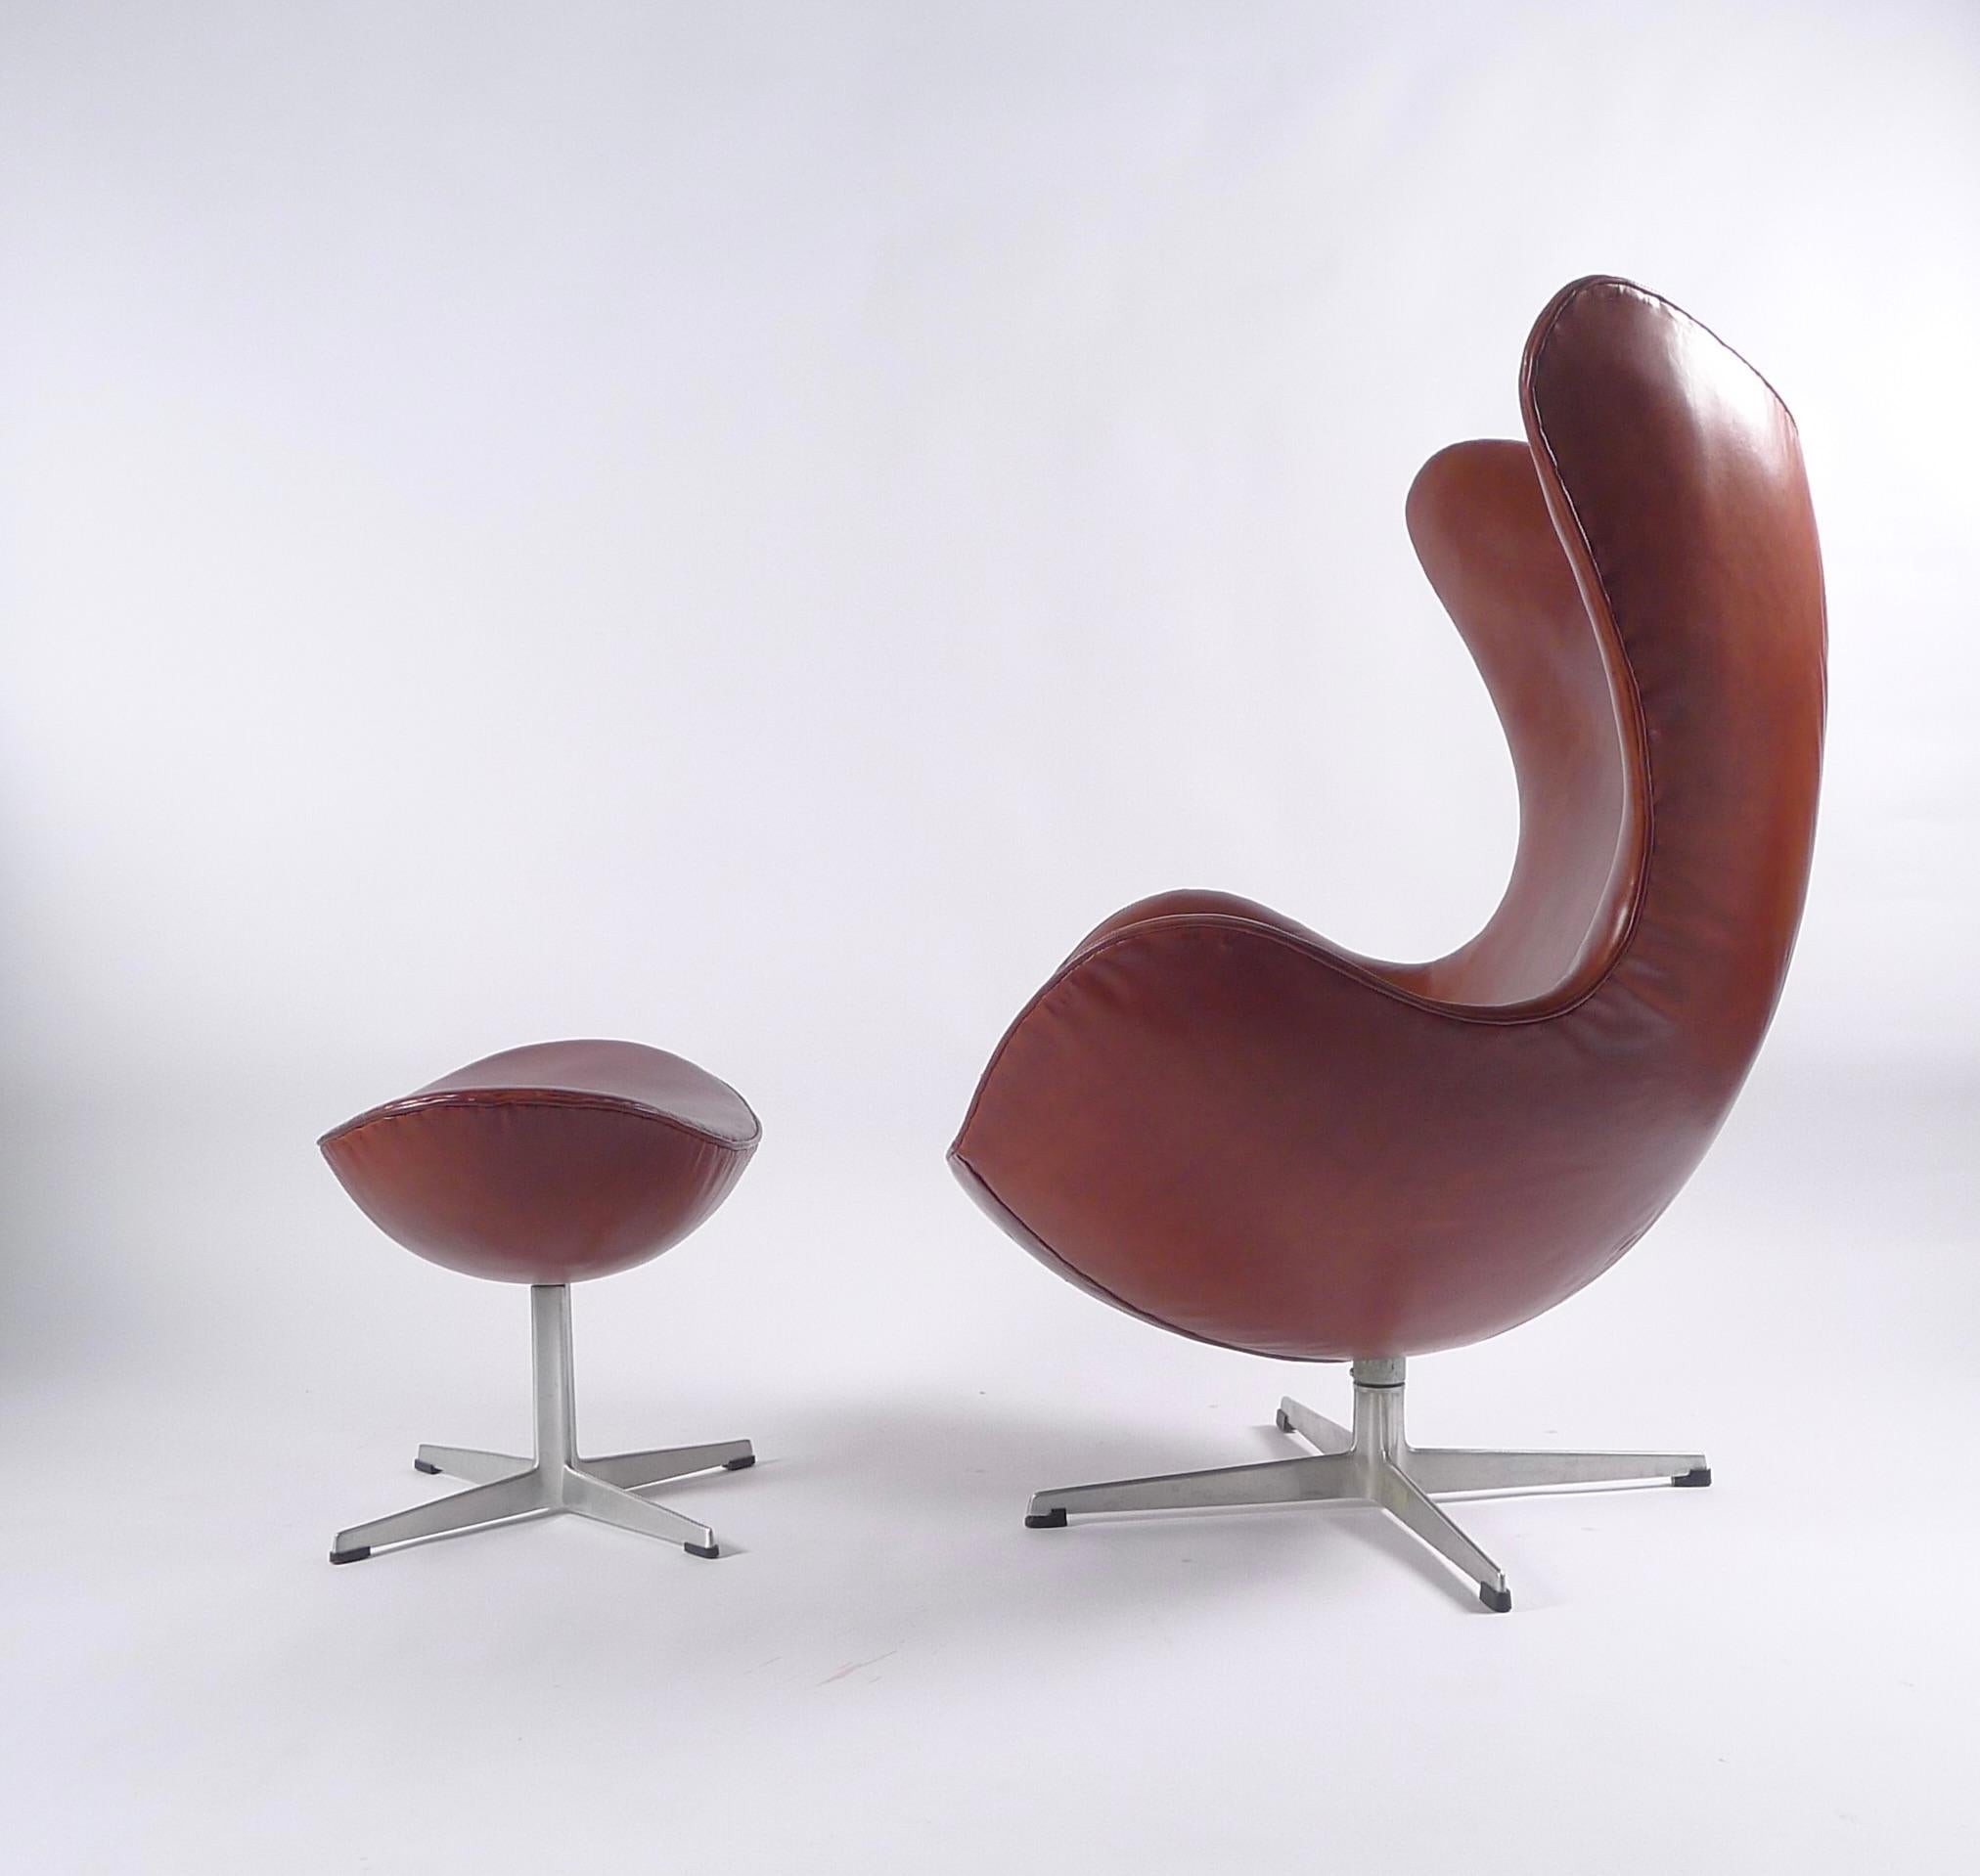 Iconic egg chair and matching ottoman, upholstered in rich cognac leather. 

This iconic chair was designed by Arne Jacobsen in 1958 as part of a commission to furnish the interior of the SAS Hotel in Copenhagen, Denmark. These chairs were placed